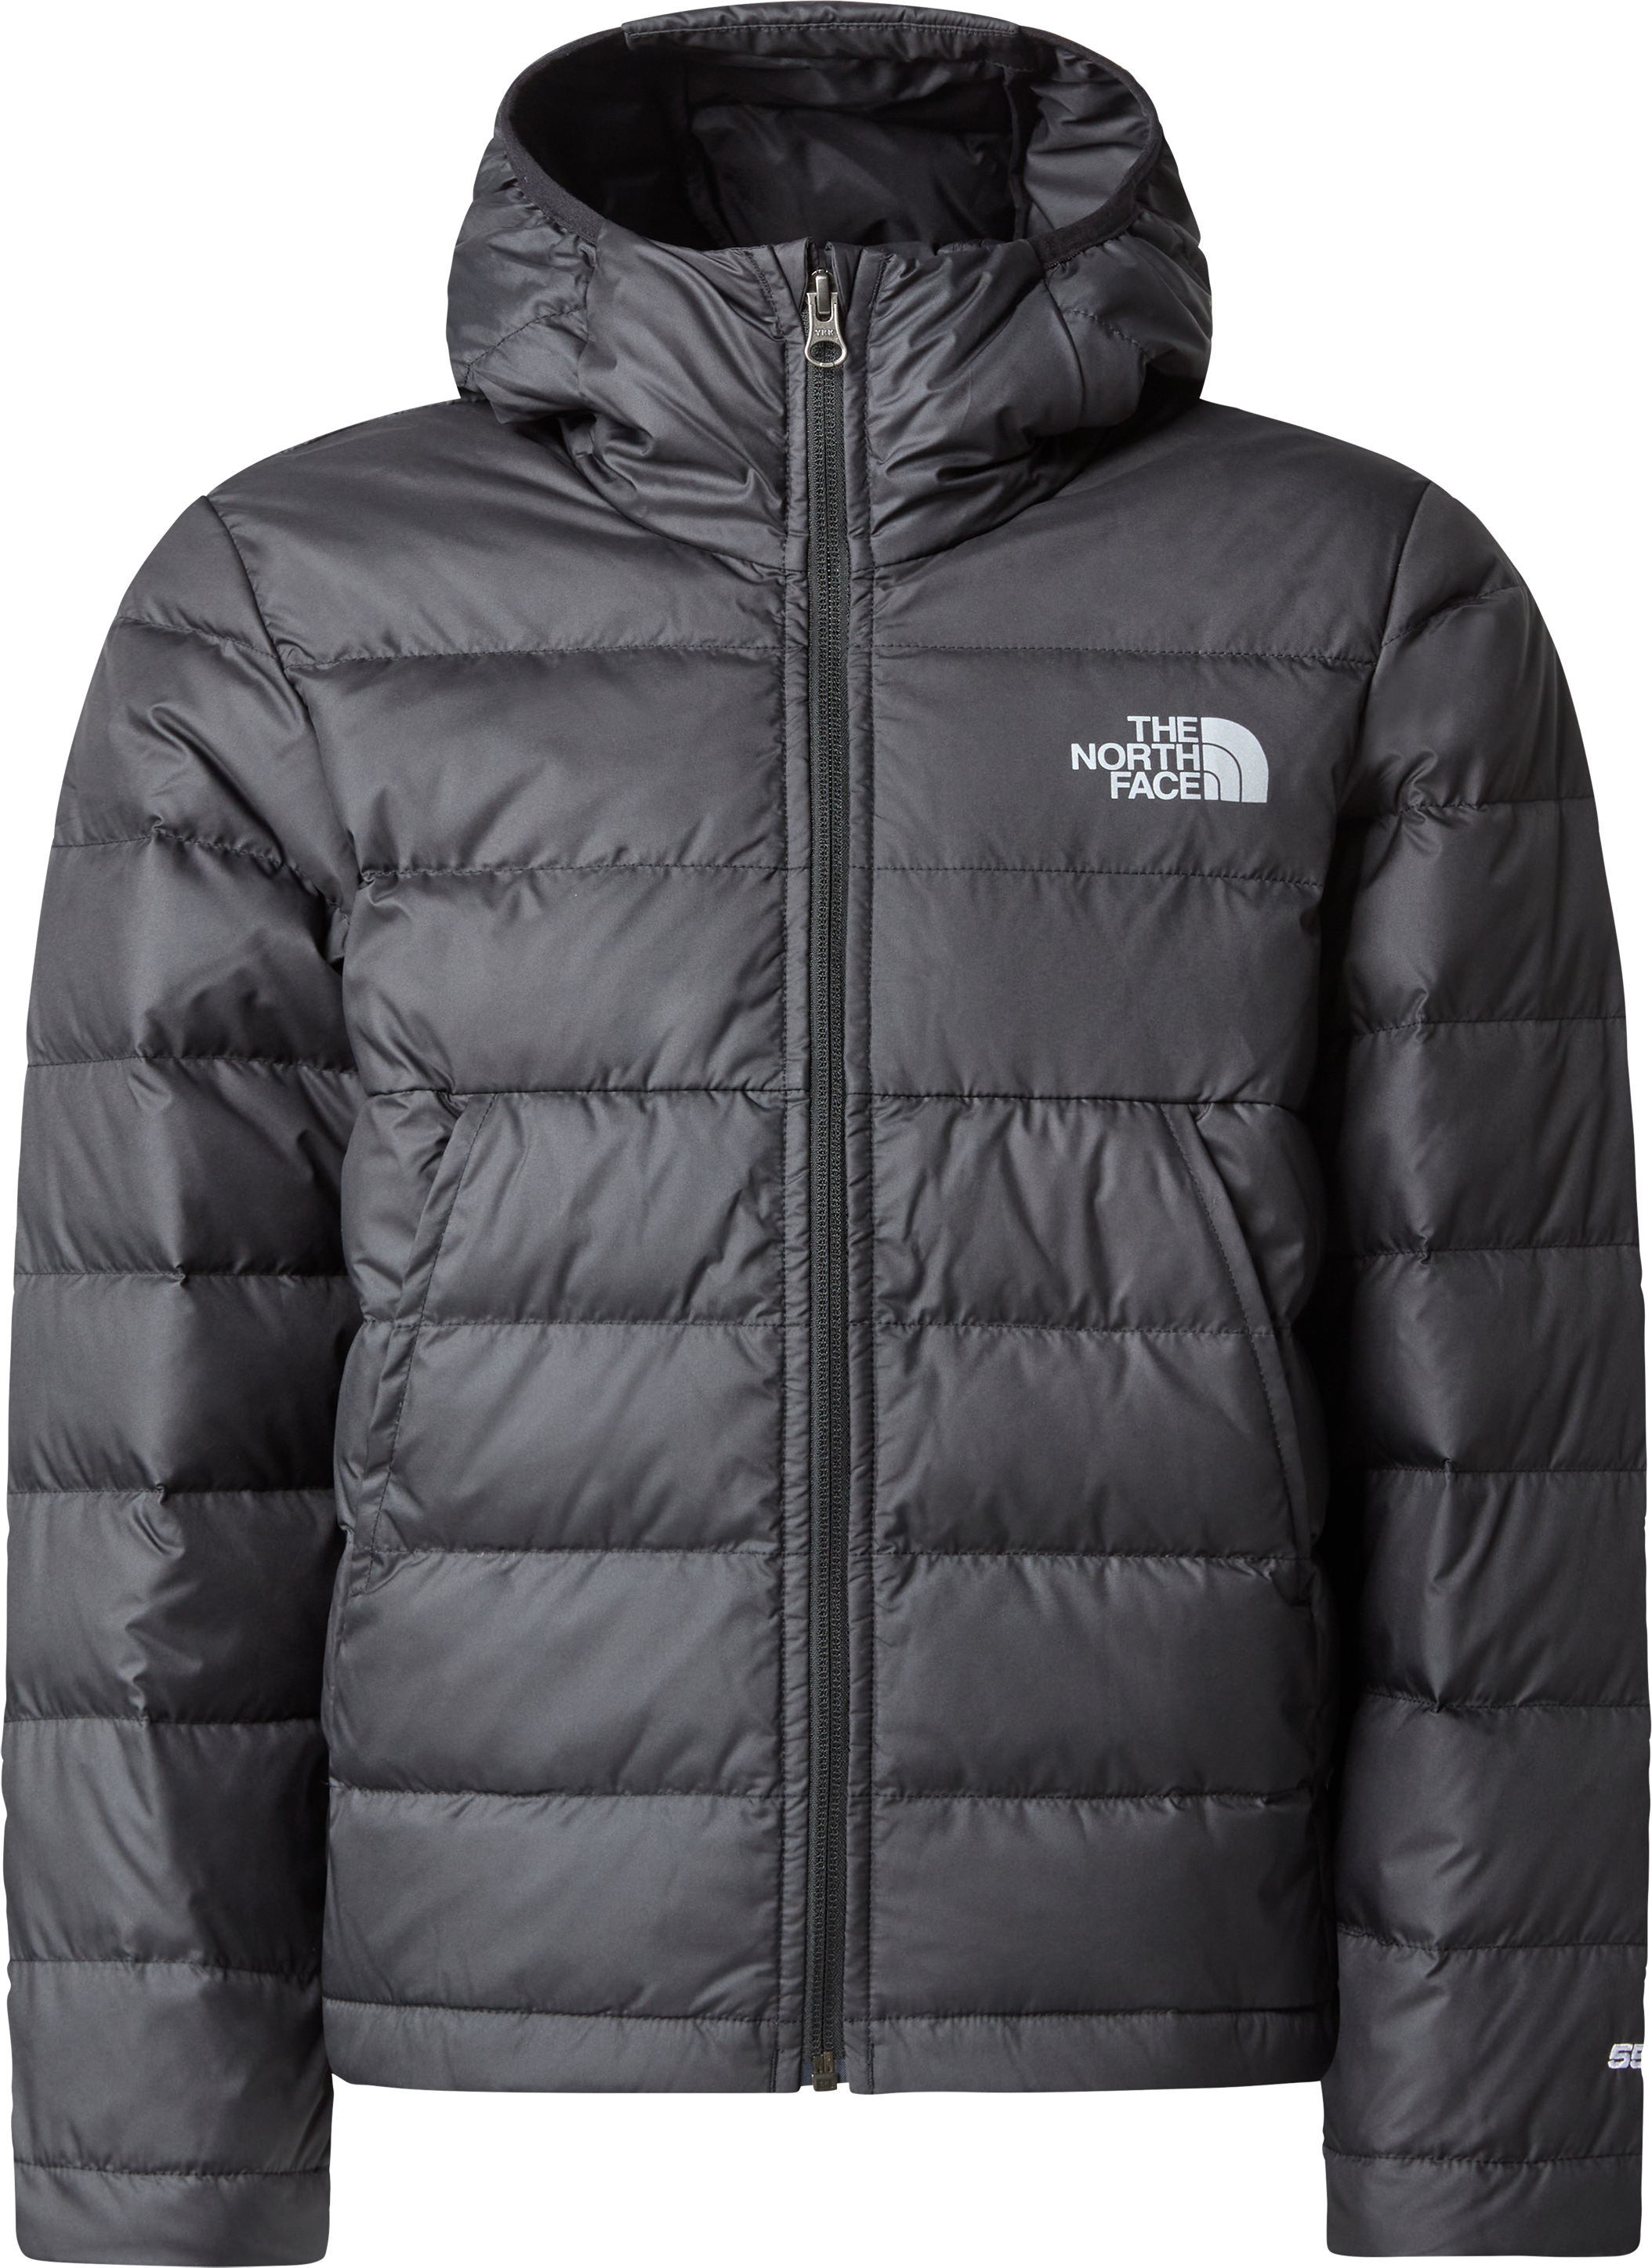 Boys' Reversible North Down Hooded Jacket | The North Face